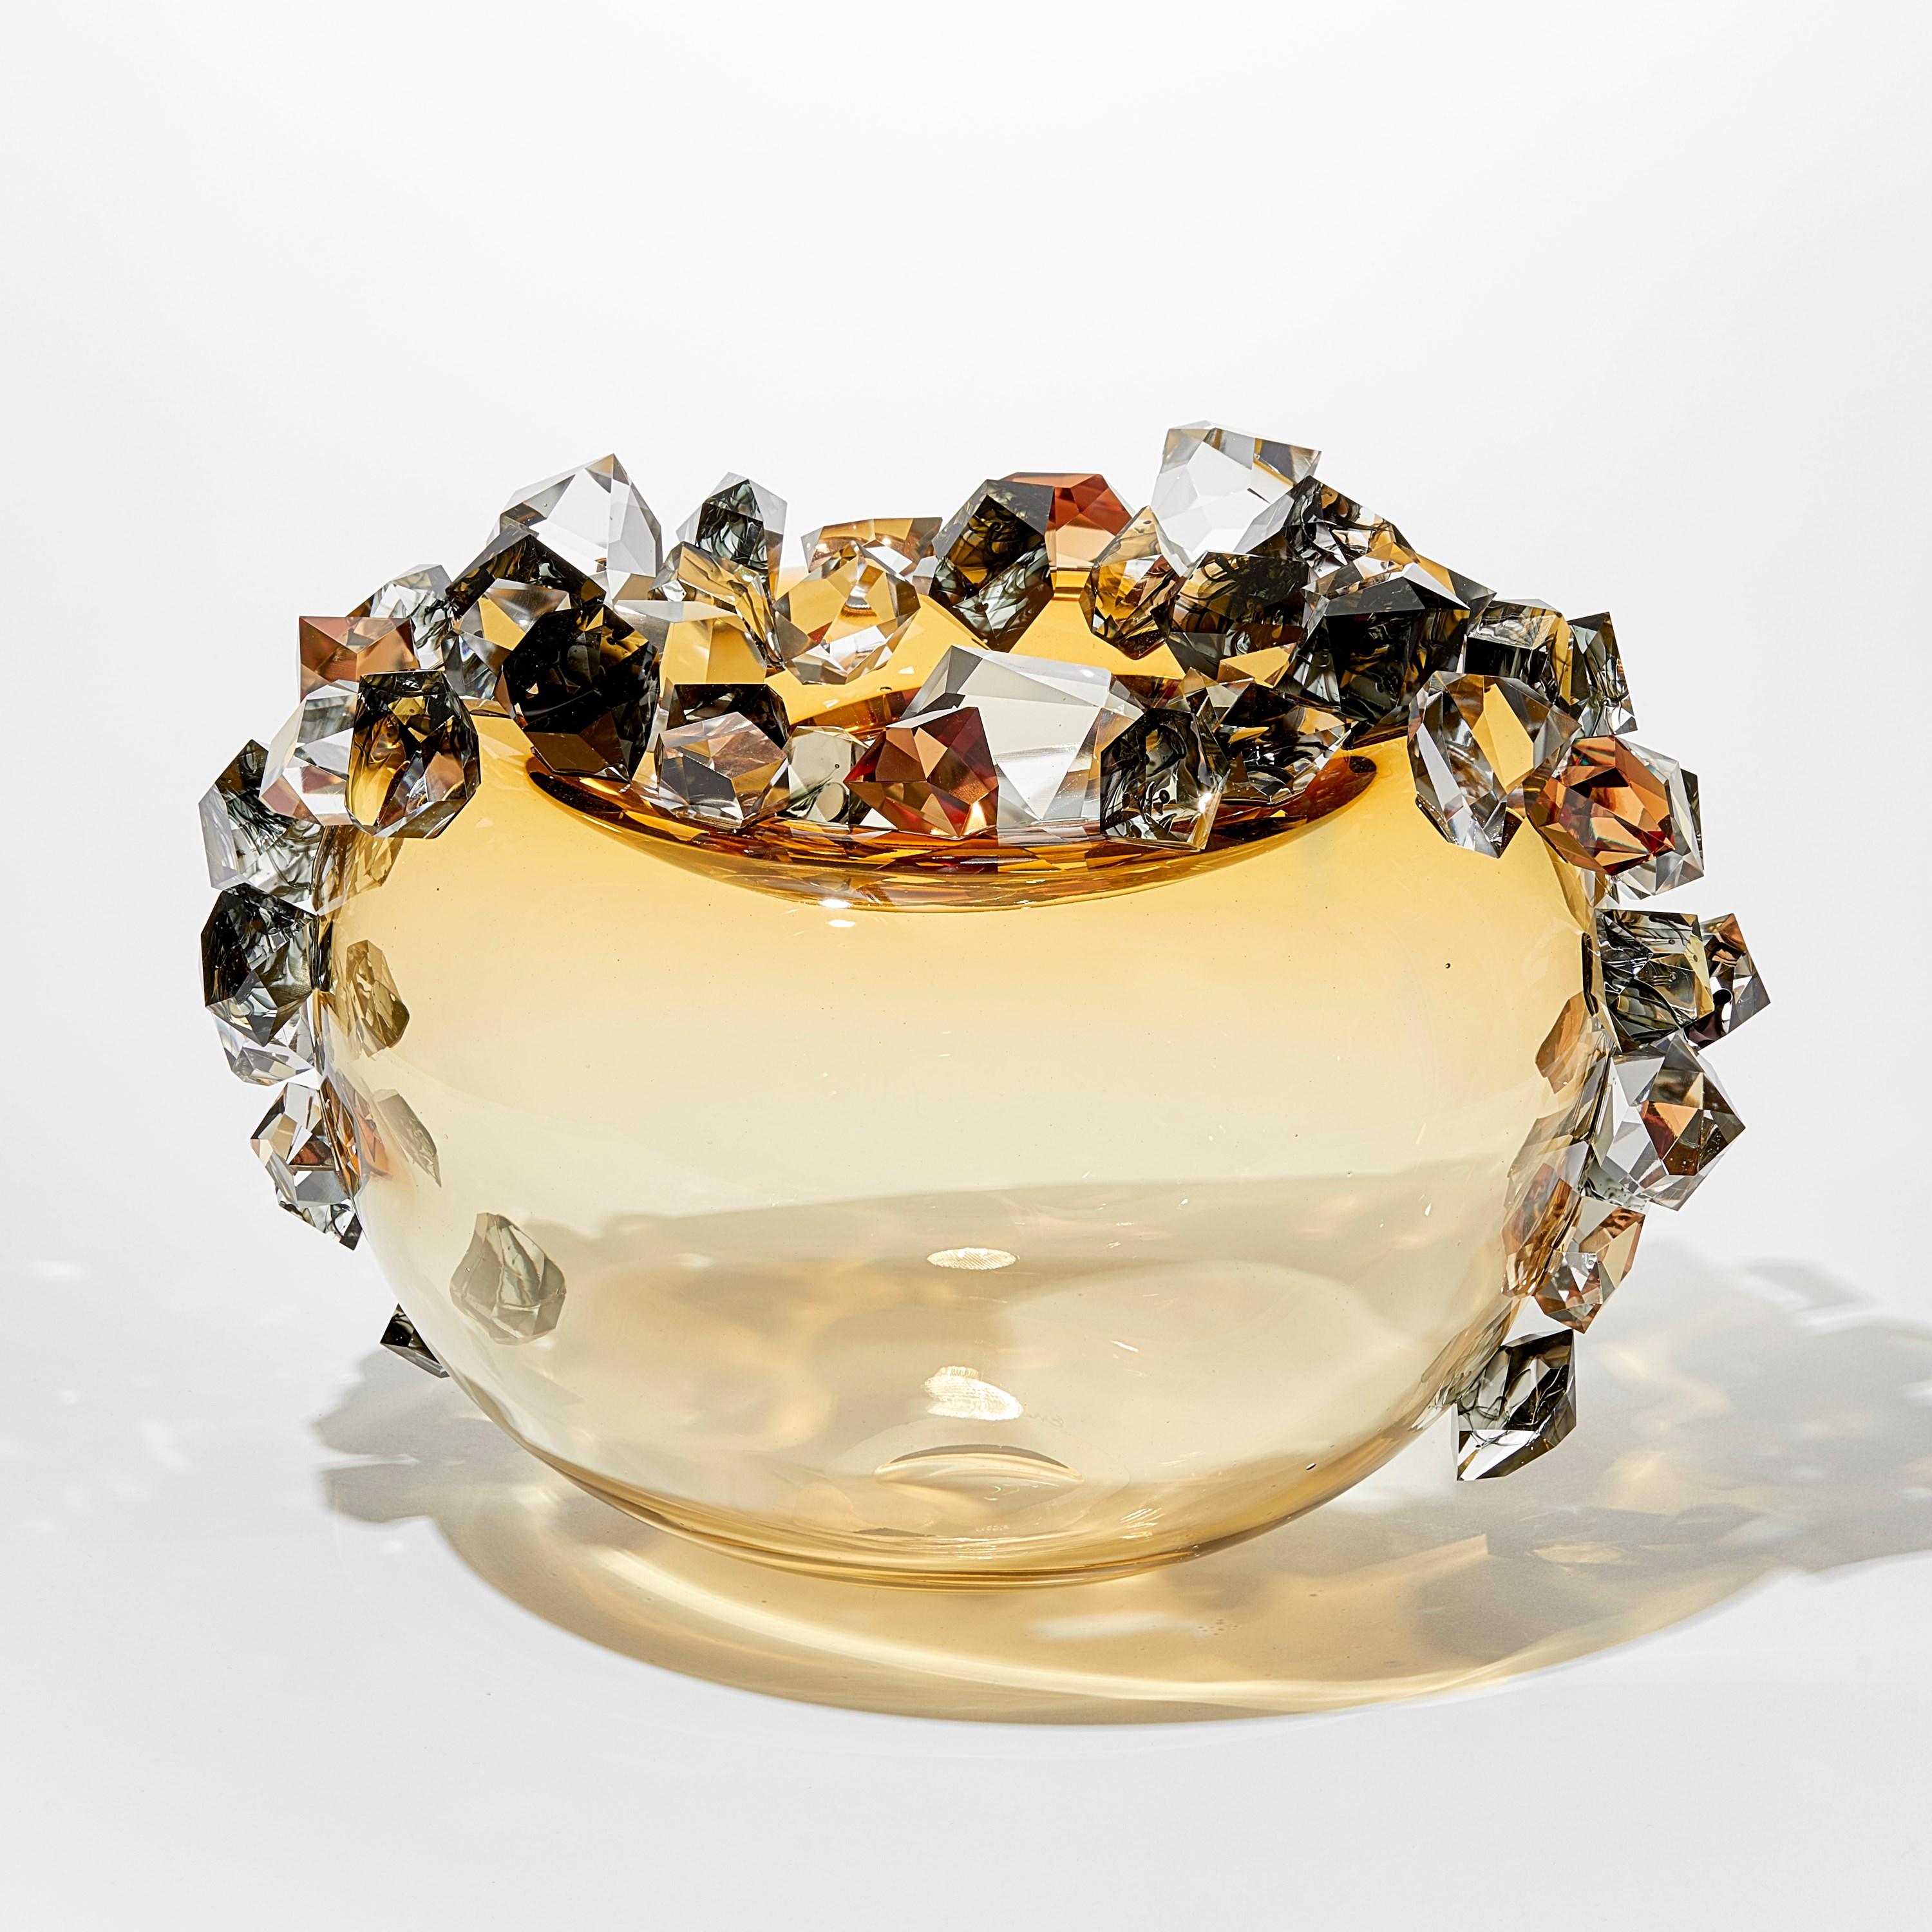 British Cristal Diffusion in Amber, crystal adorned glass sculpture by Hanne Enemark For Sale